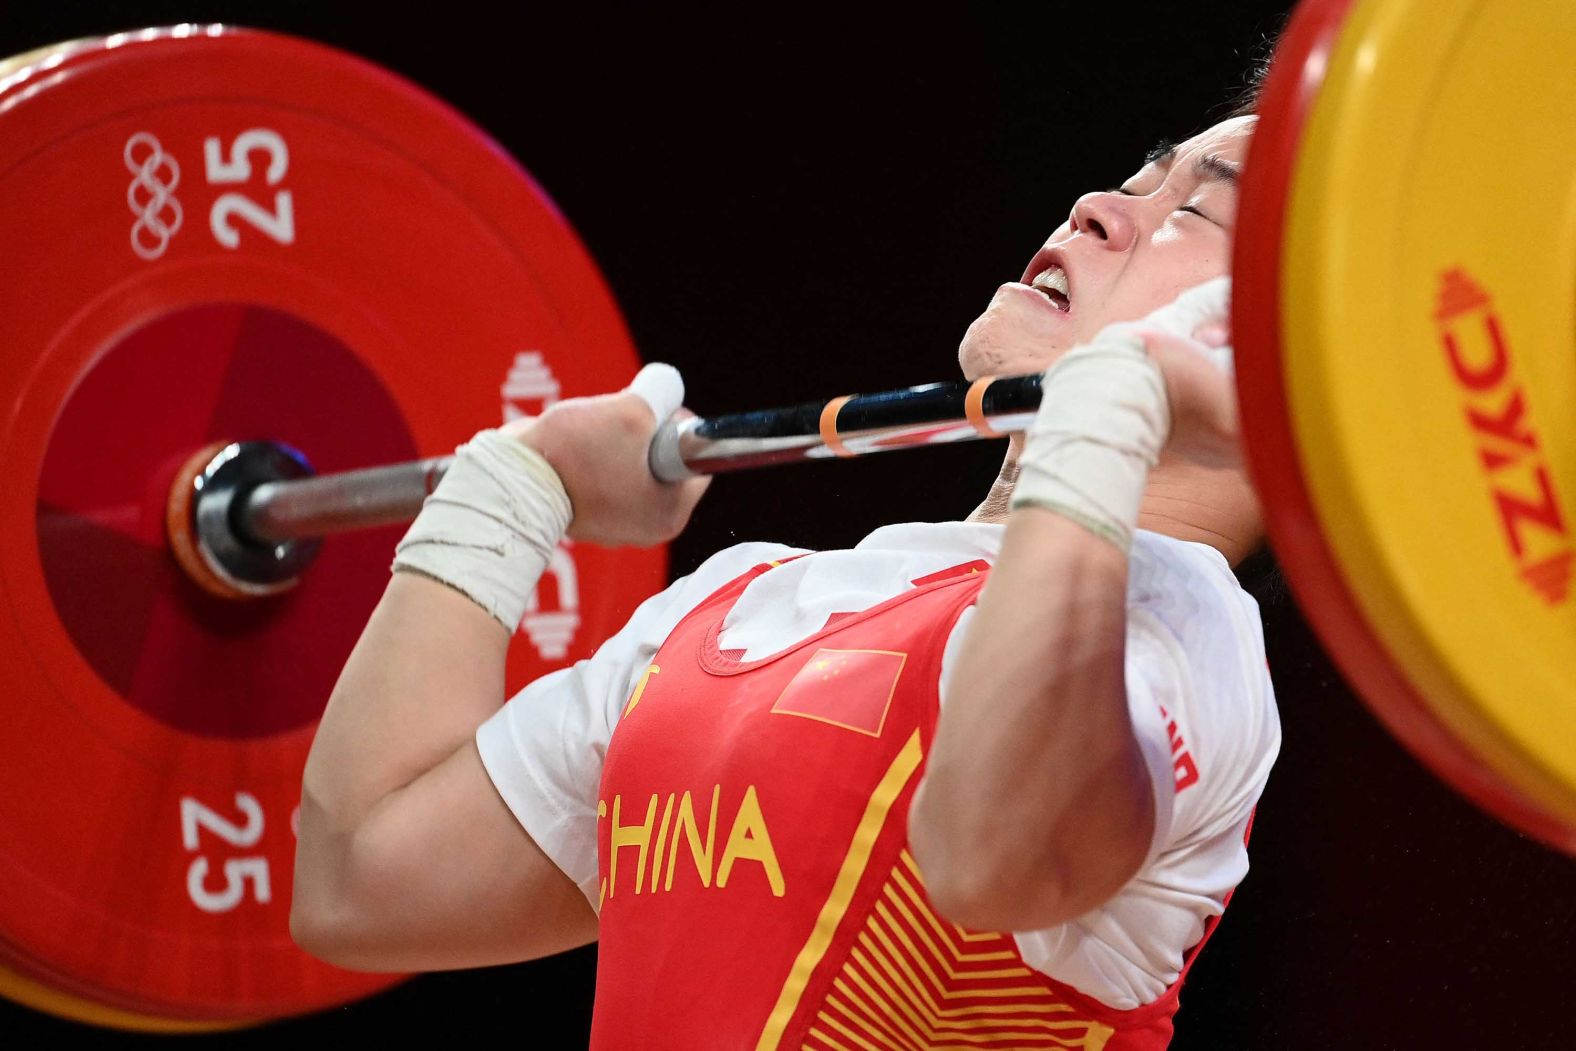 Chinese weightlifter Hou Zhihui competes on July 24. She <a href="index.php?page=&url=https%3A%2F%2Fedition.cnn.com%2Fworld%2Flive-news%2Ftokyo-2020-olympics-07-24-21-spt%2Fh_7eef141d1b789bd62d1b4ad4e61a7fd5" target="_blank">set an Olympic record</a> in her 49-kilogram weight class, lifting 94 kilograms in the snatch round and 116 kilograms in the clean-and-jerk.